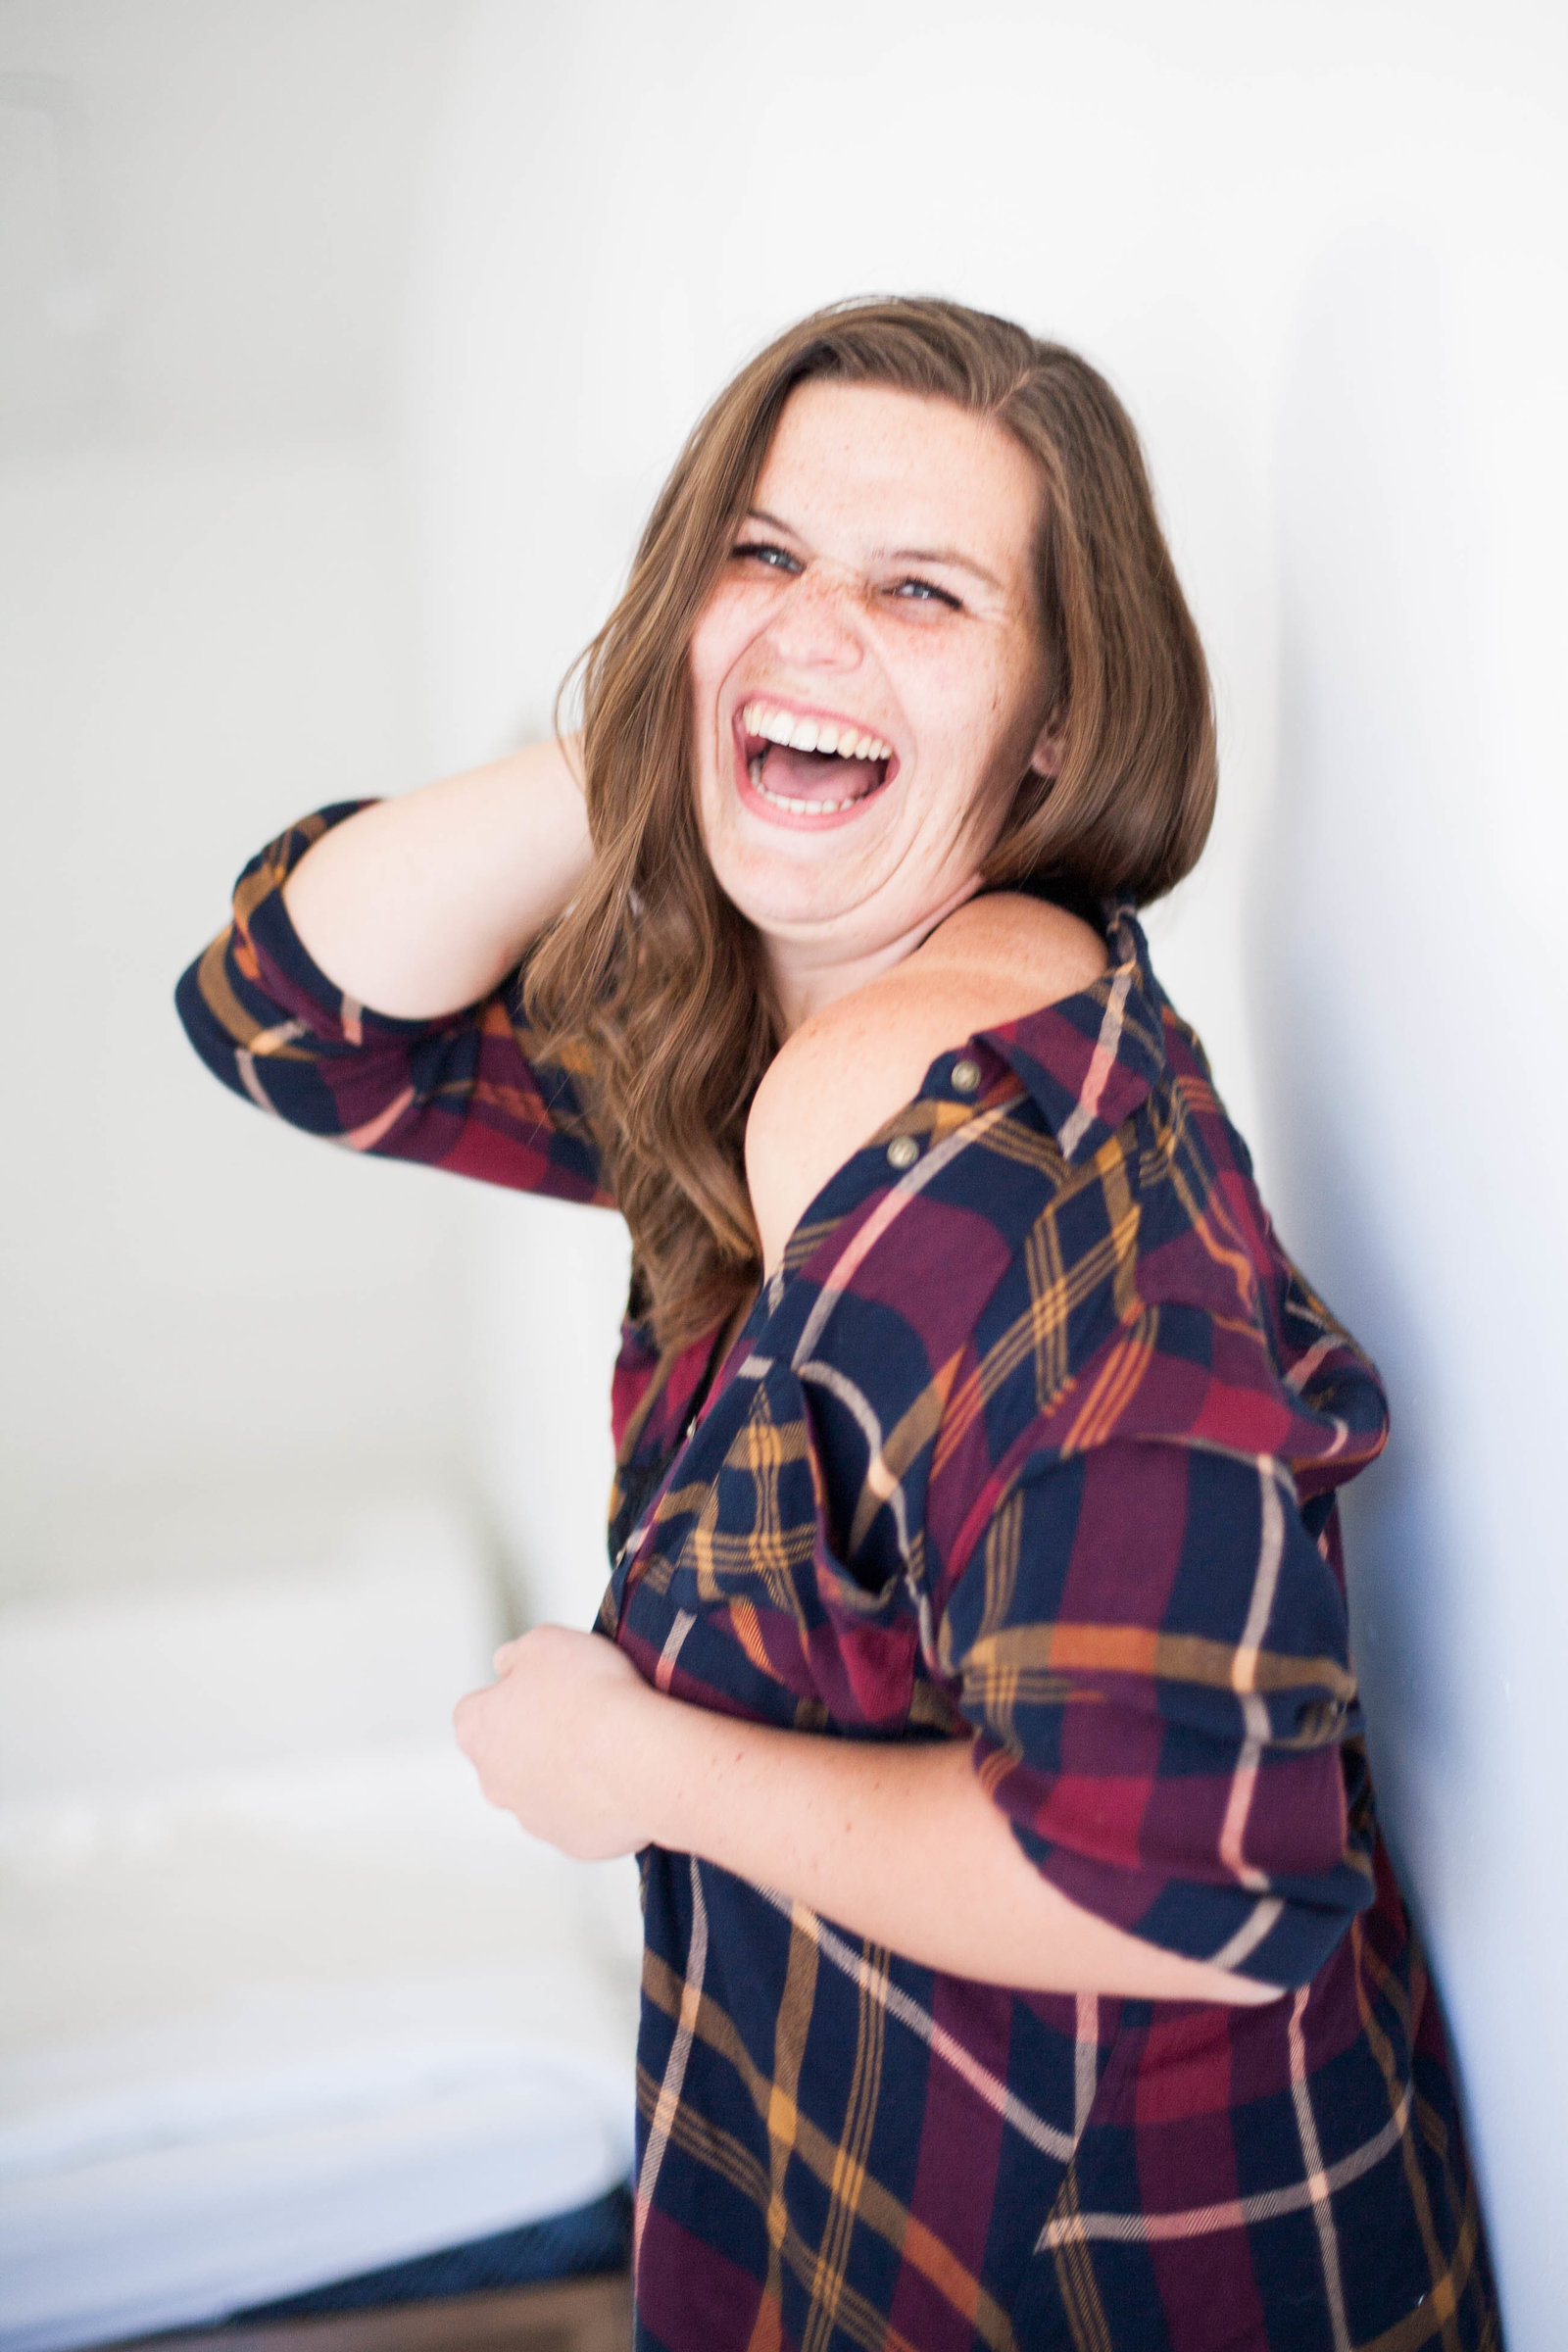 A woman with brown hair laughing.